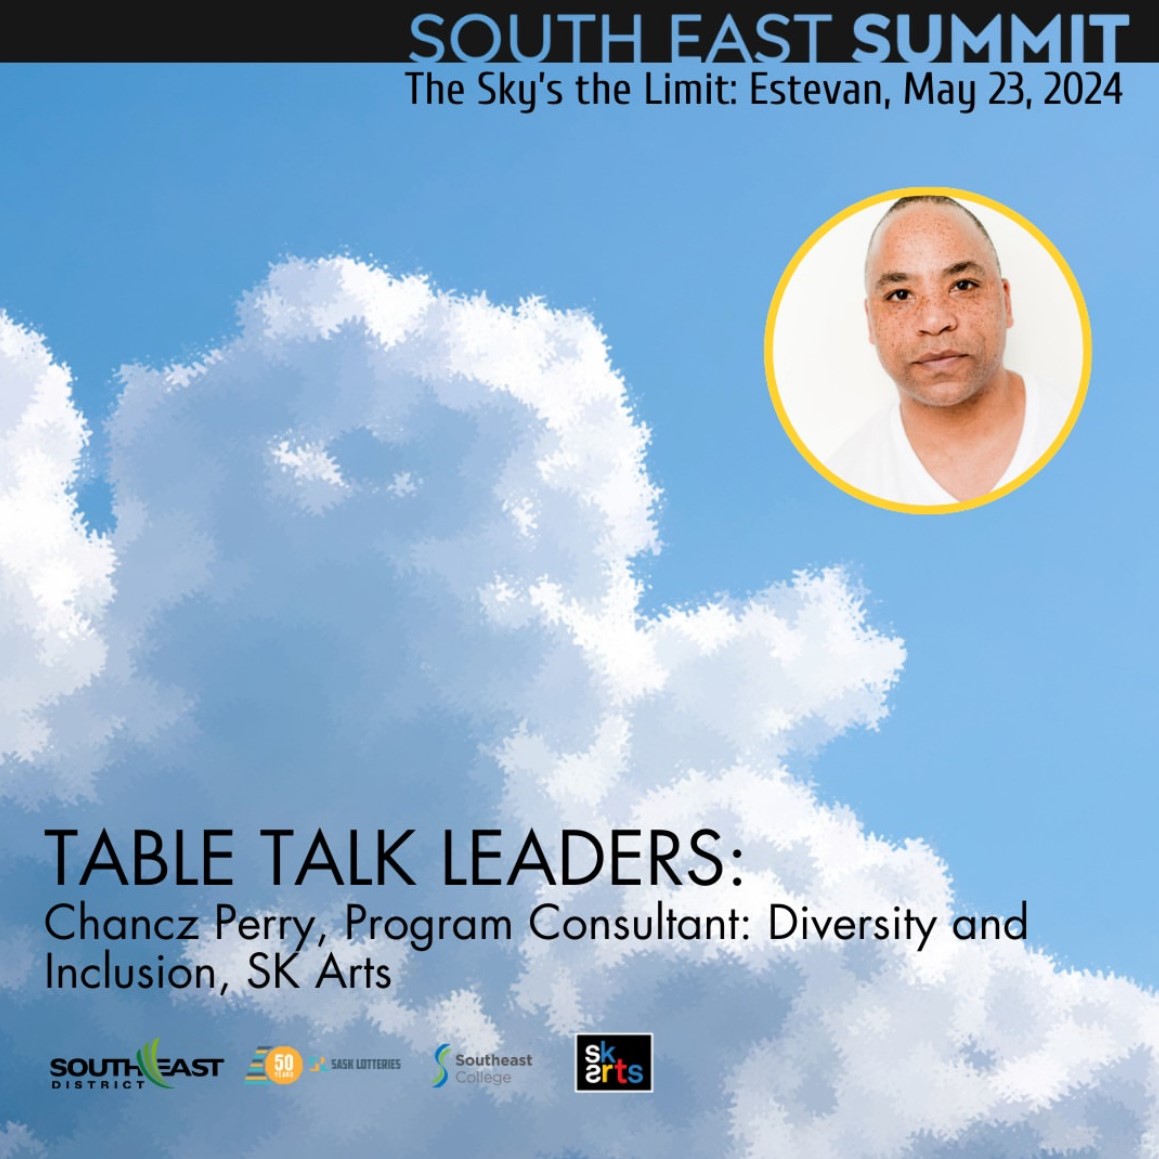 [Image with Text] South East Summit. The Sky's the Limit: Estevan, May 23, 2024. [Circle of Photo of headshot of Chancz Perry] [Text:] Table Talk Leaders:  Chancz Perry, Program Consultant: Diversity and Inclusion,  [Images] SK Arts Southeast District logo, Sask Lotteries Logo,  Southeast College logo. SK Arts logo